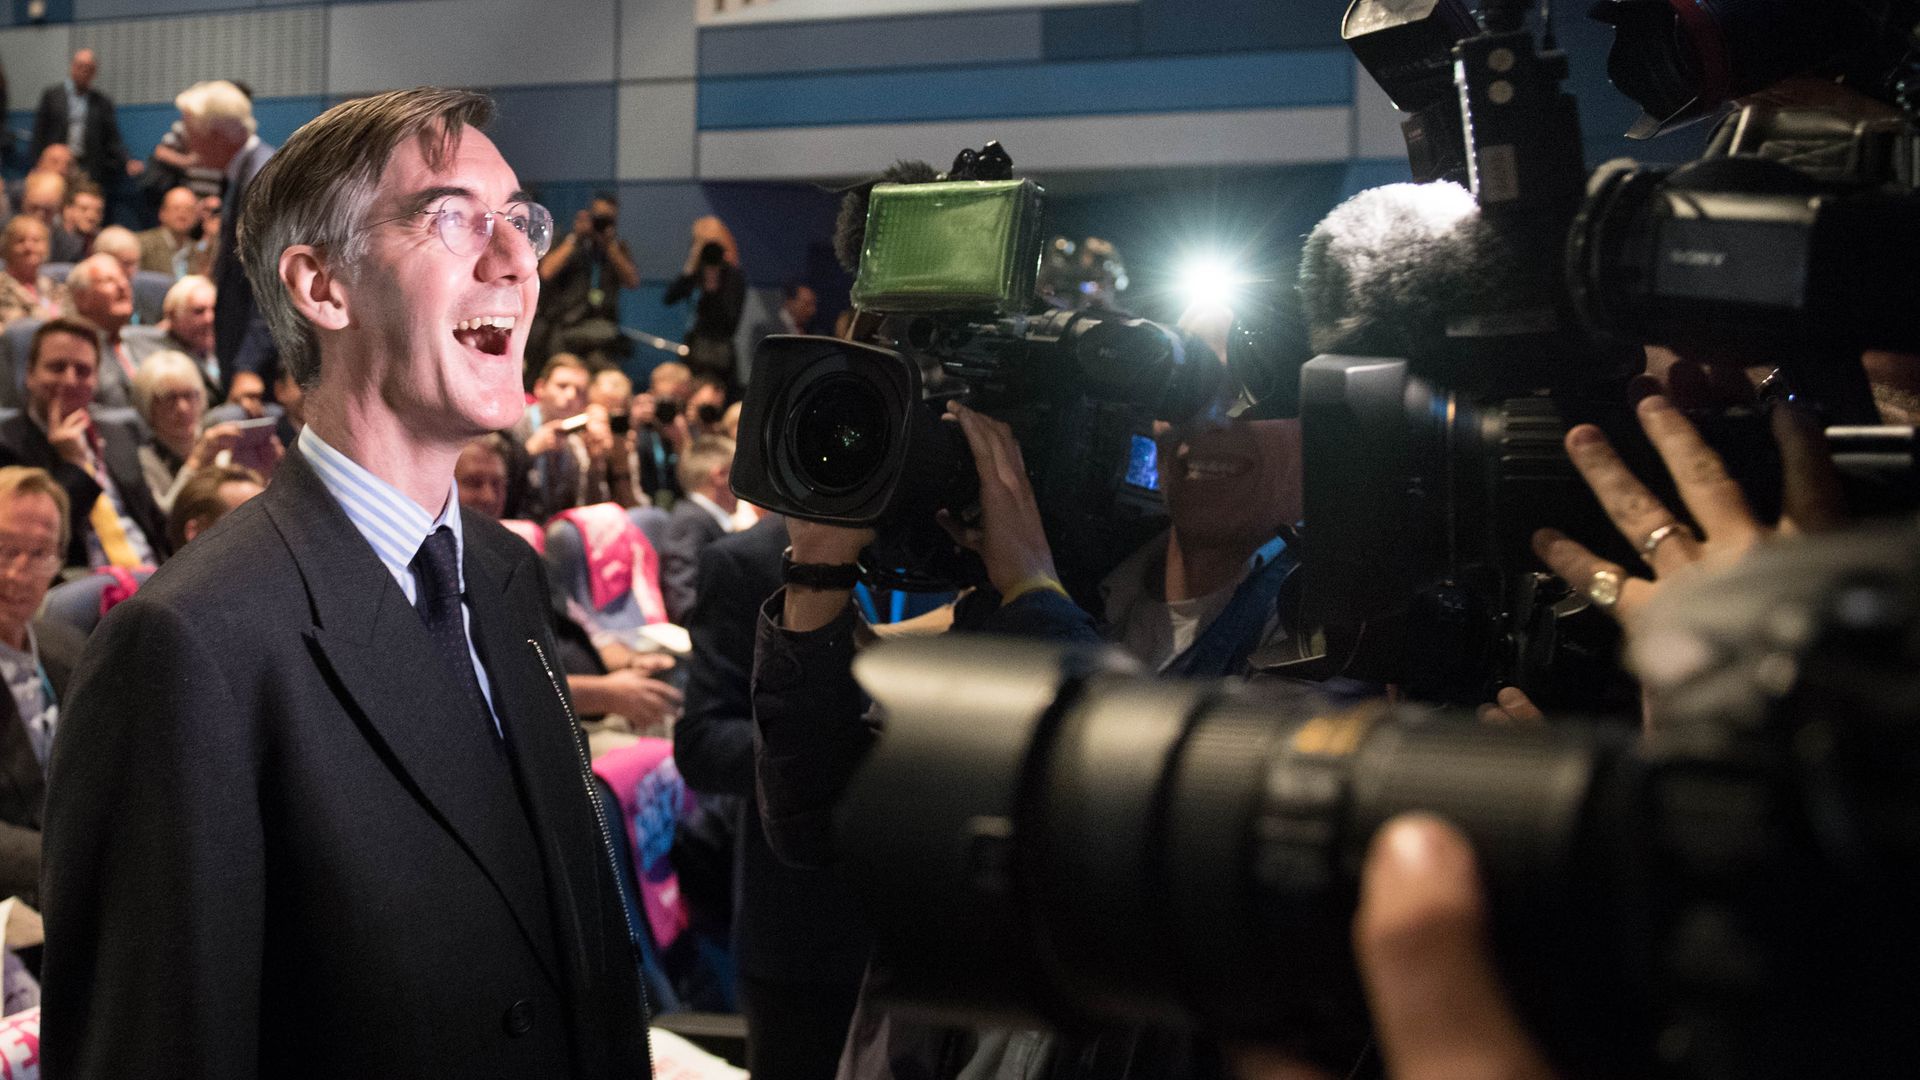 Jacob Rees Mogg smiles for the camera during a fringe event to discuss Brexit during the Conservative Party annual conference in Birmingham - Credit: Stefan Rousseau/PA Wire/PA Images